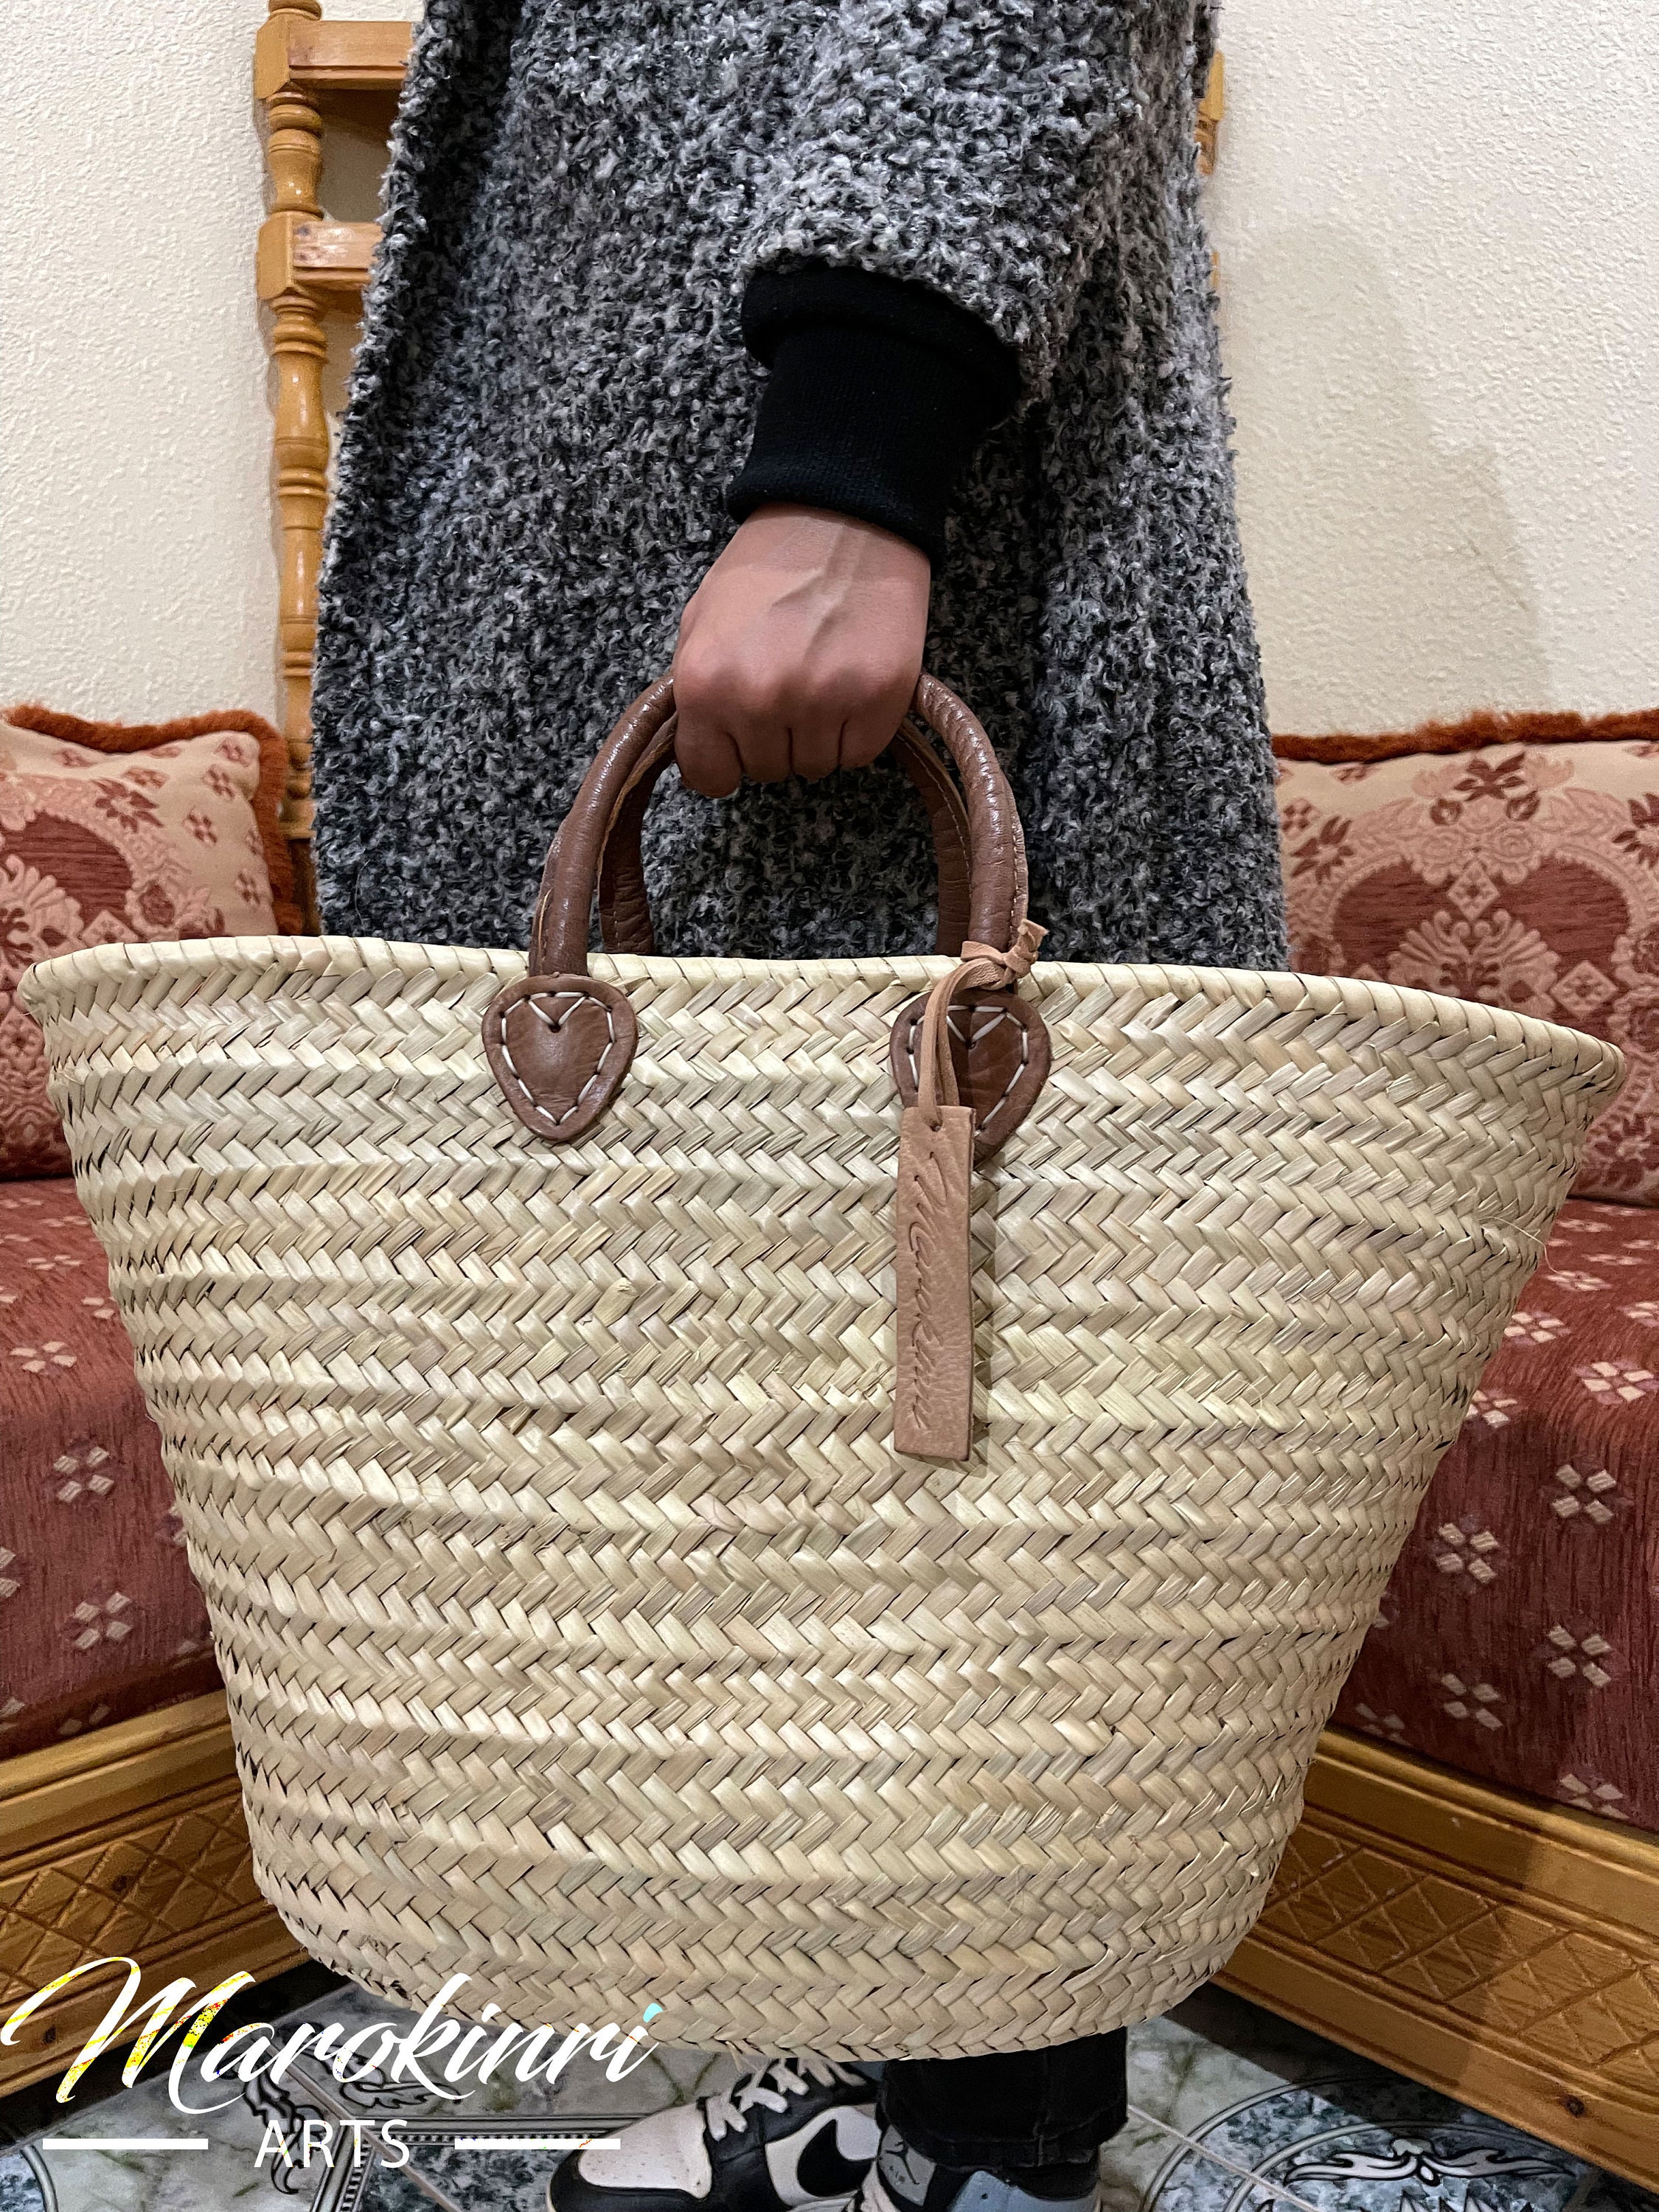 Moroccan Straw & Leather Shopping French Market Basket Bag Large Moroccan 